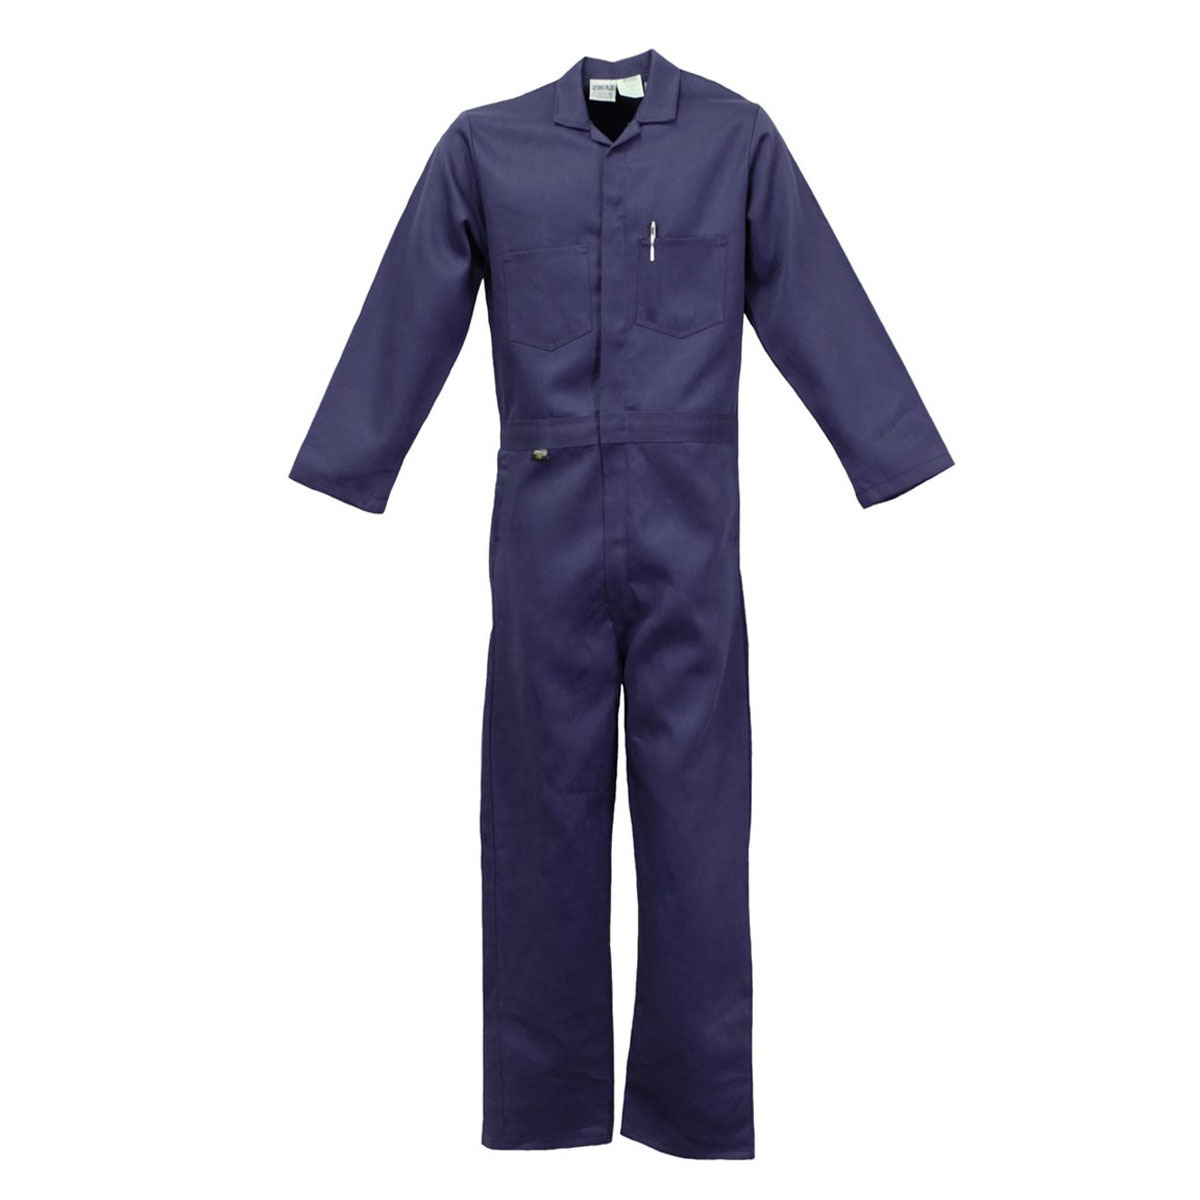 Stanco Safety Products™ Size 4X Tall Navy Blue Indura® Arc Rated Flame Resistant Coveralls With Front Zipper Closure